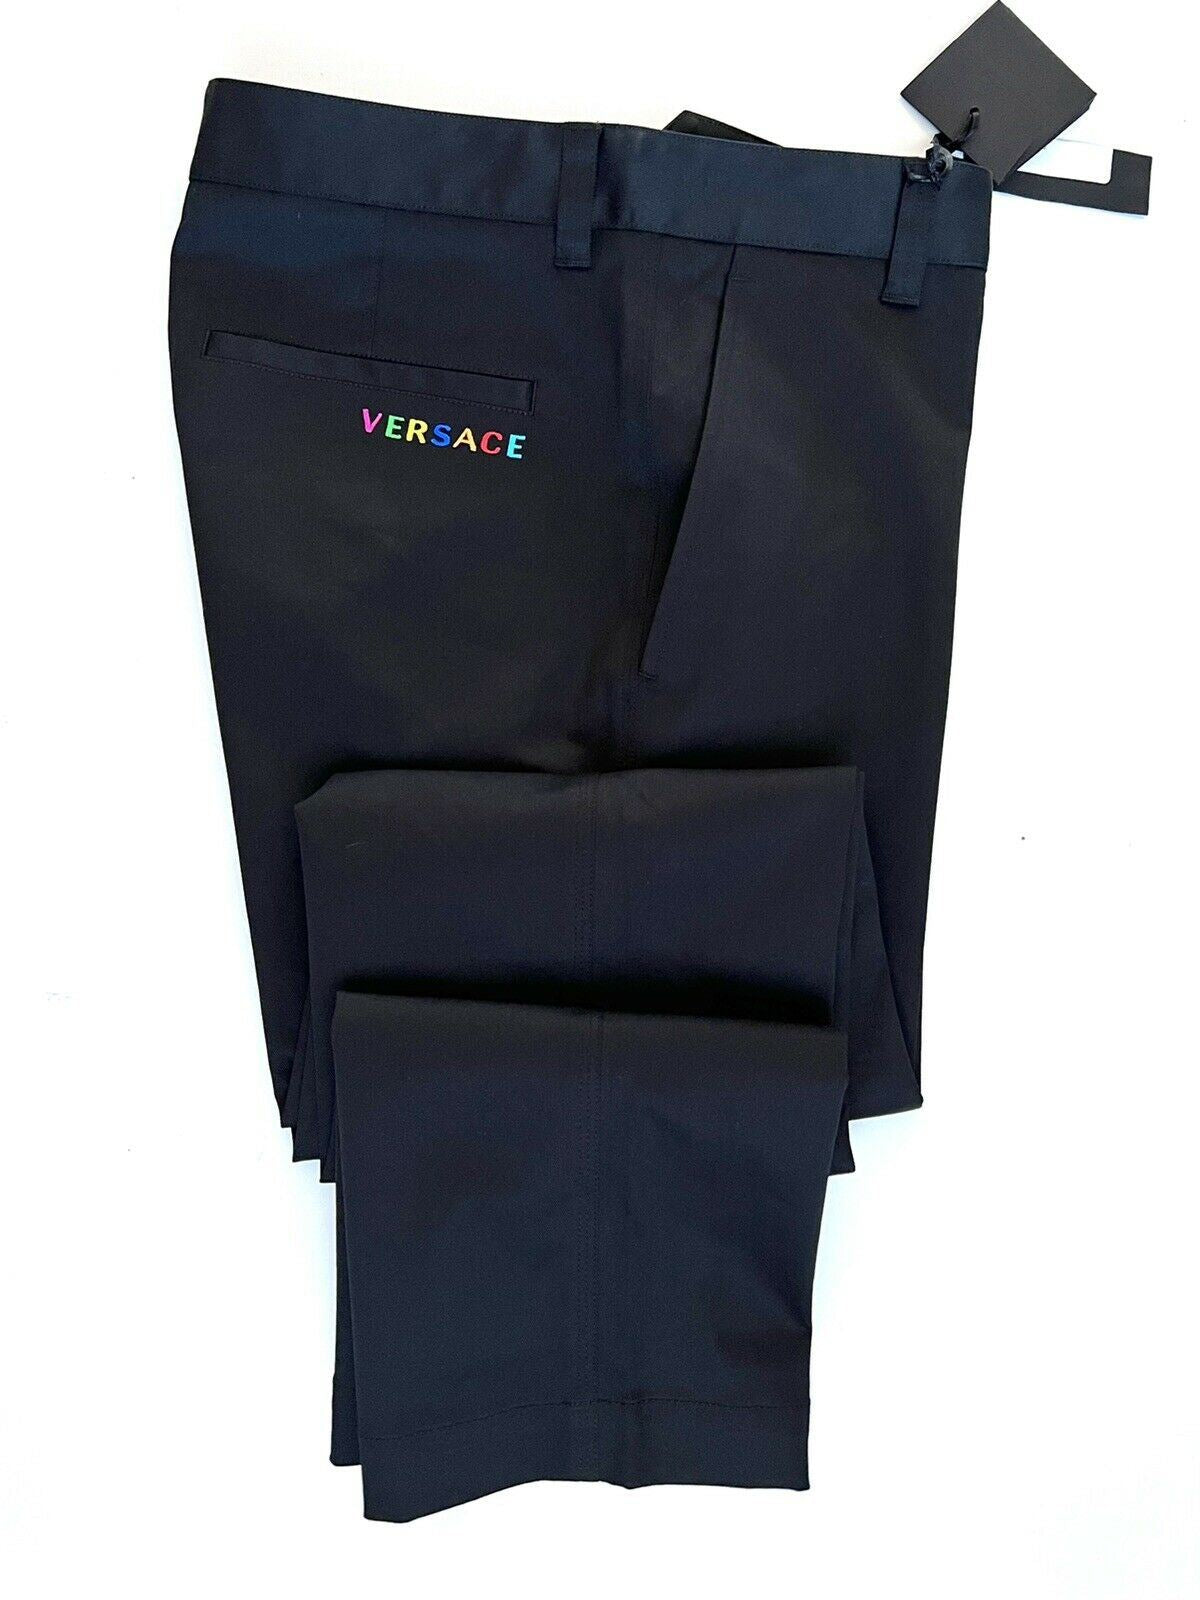 NWT $650 Versace Men's Black Pants 38 US (54 Euro) Made in Italy A84004